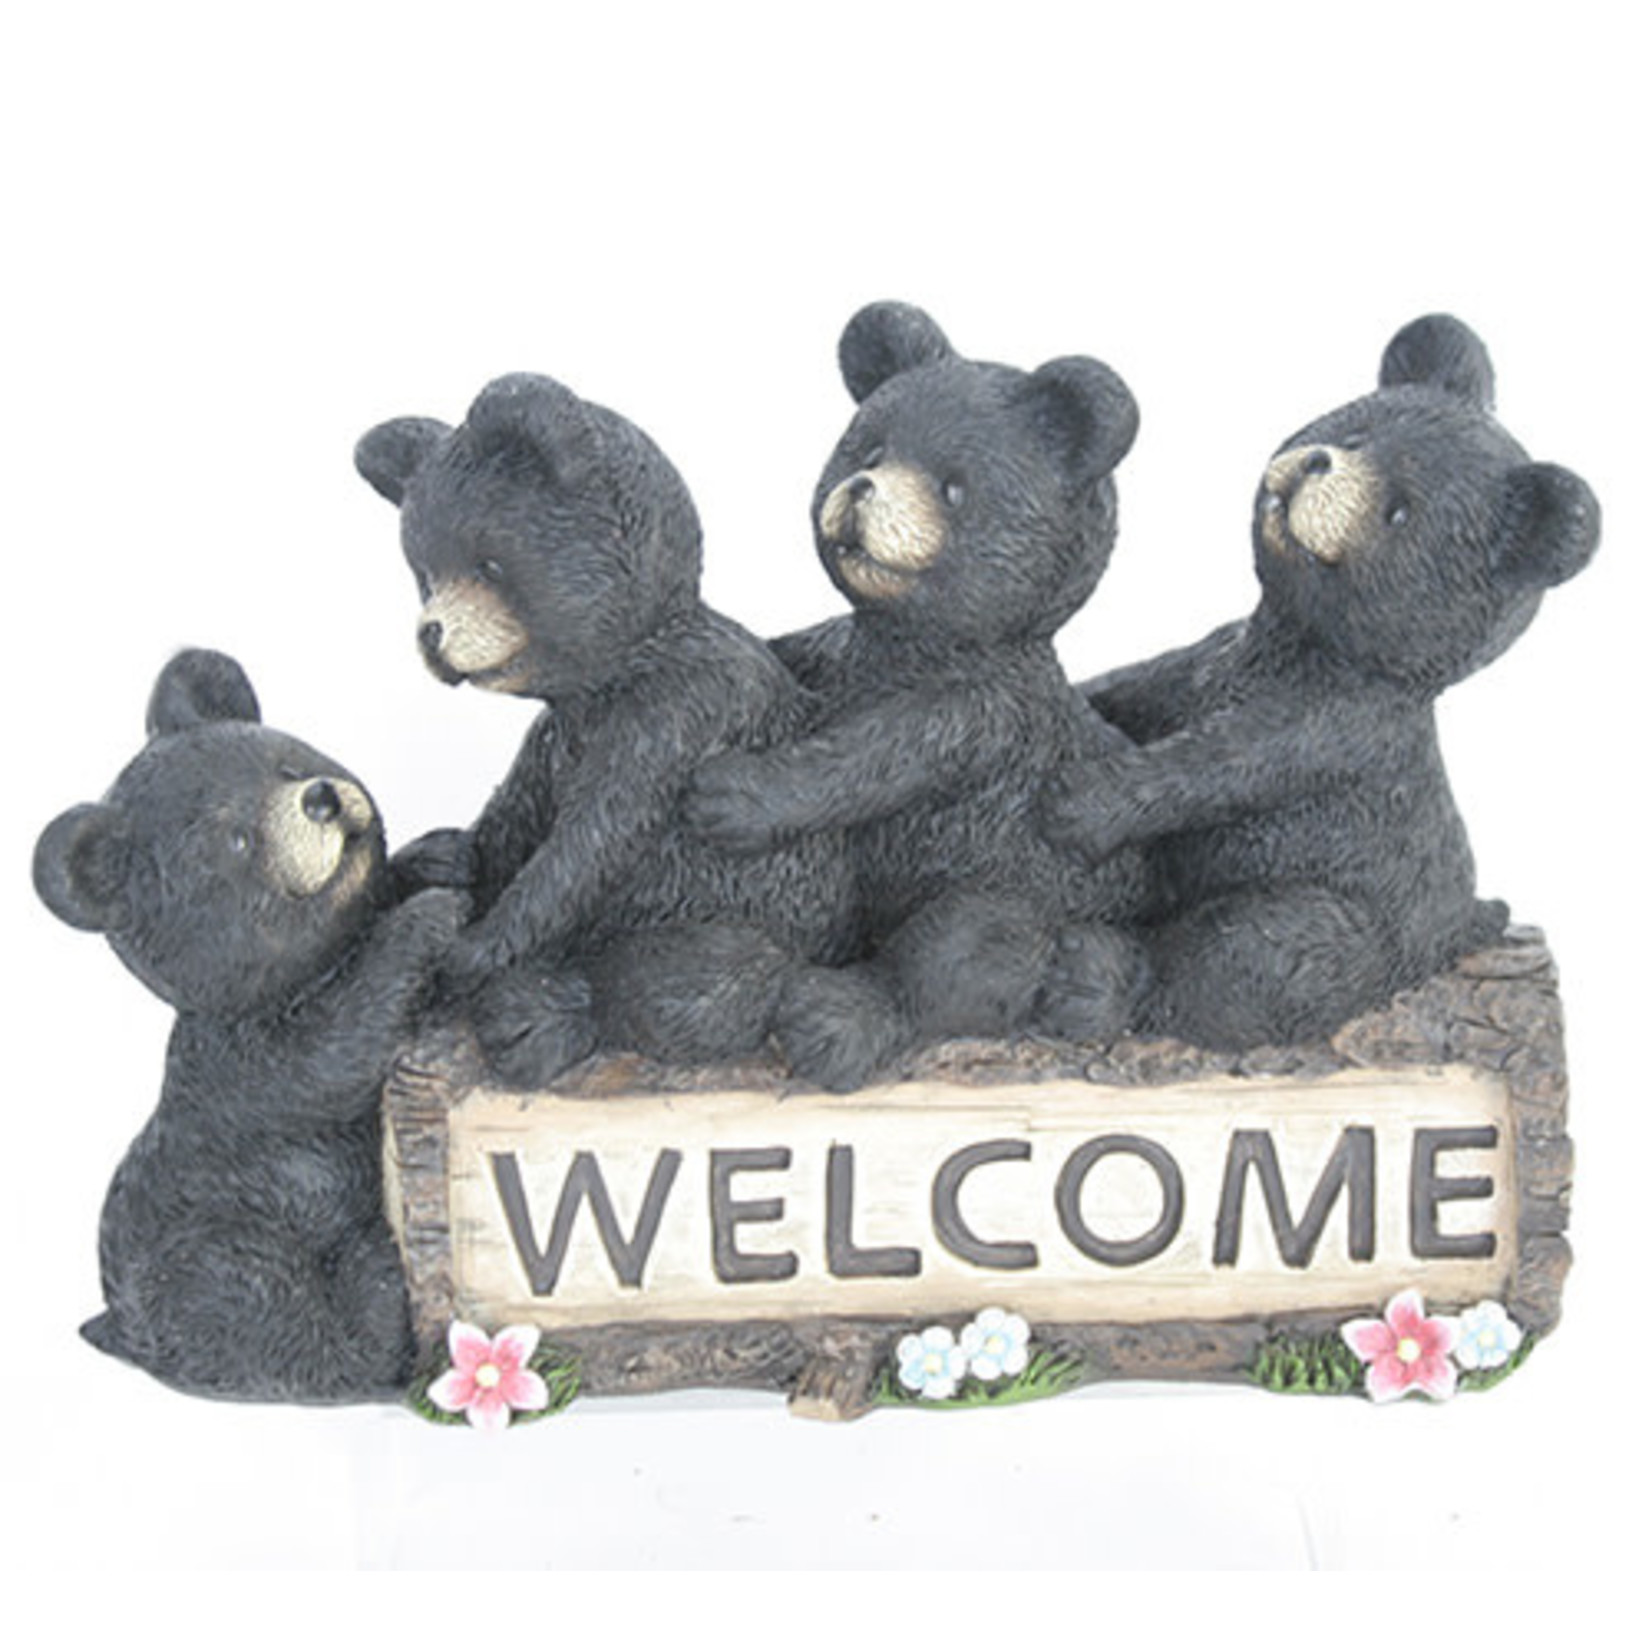 Bears sittting on welcome